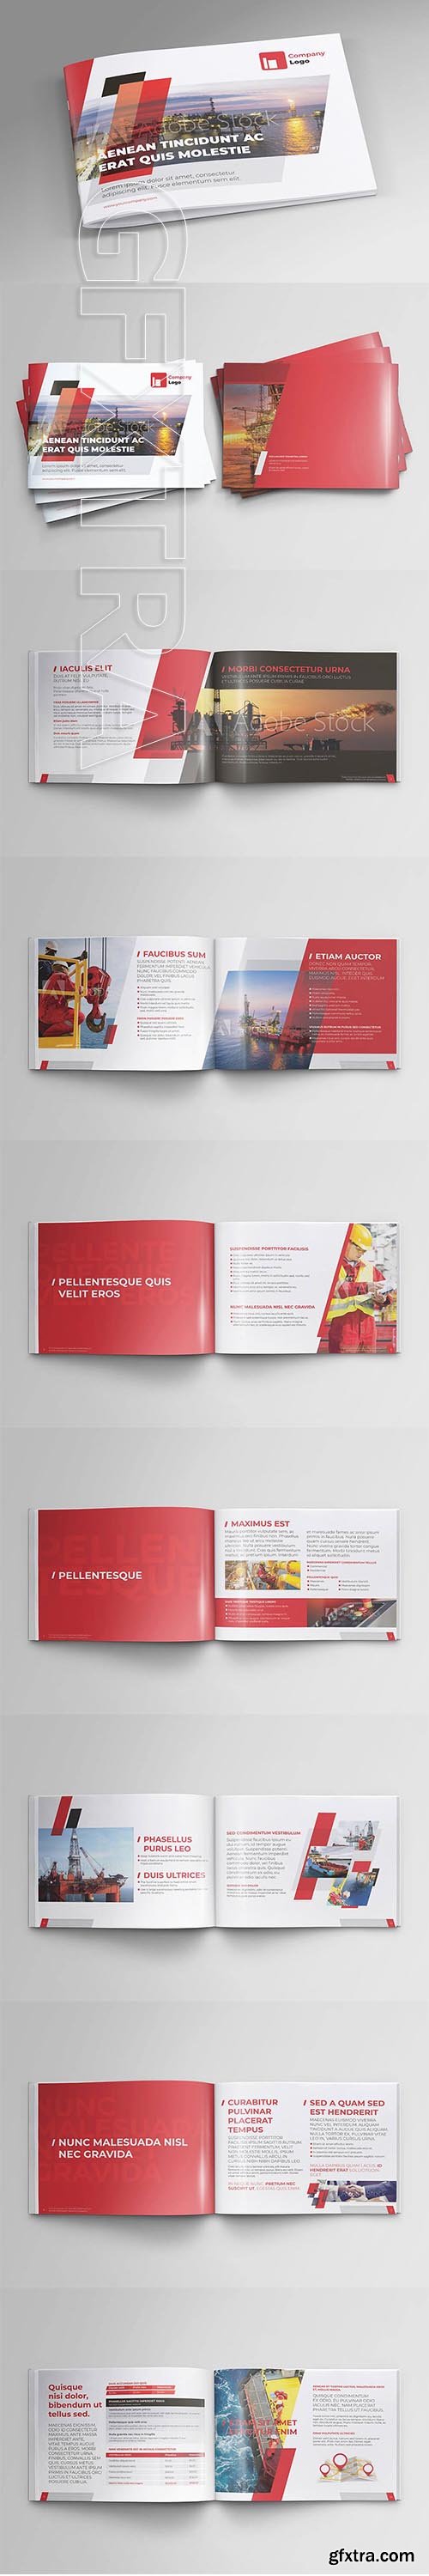 CreativeMarket - Offshore Oil and Gas Booklet Design 3609690